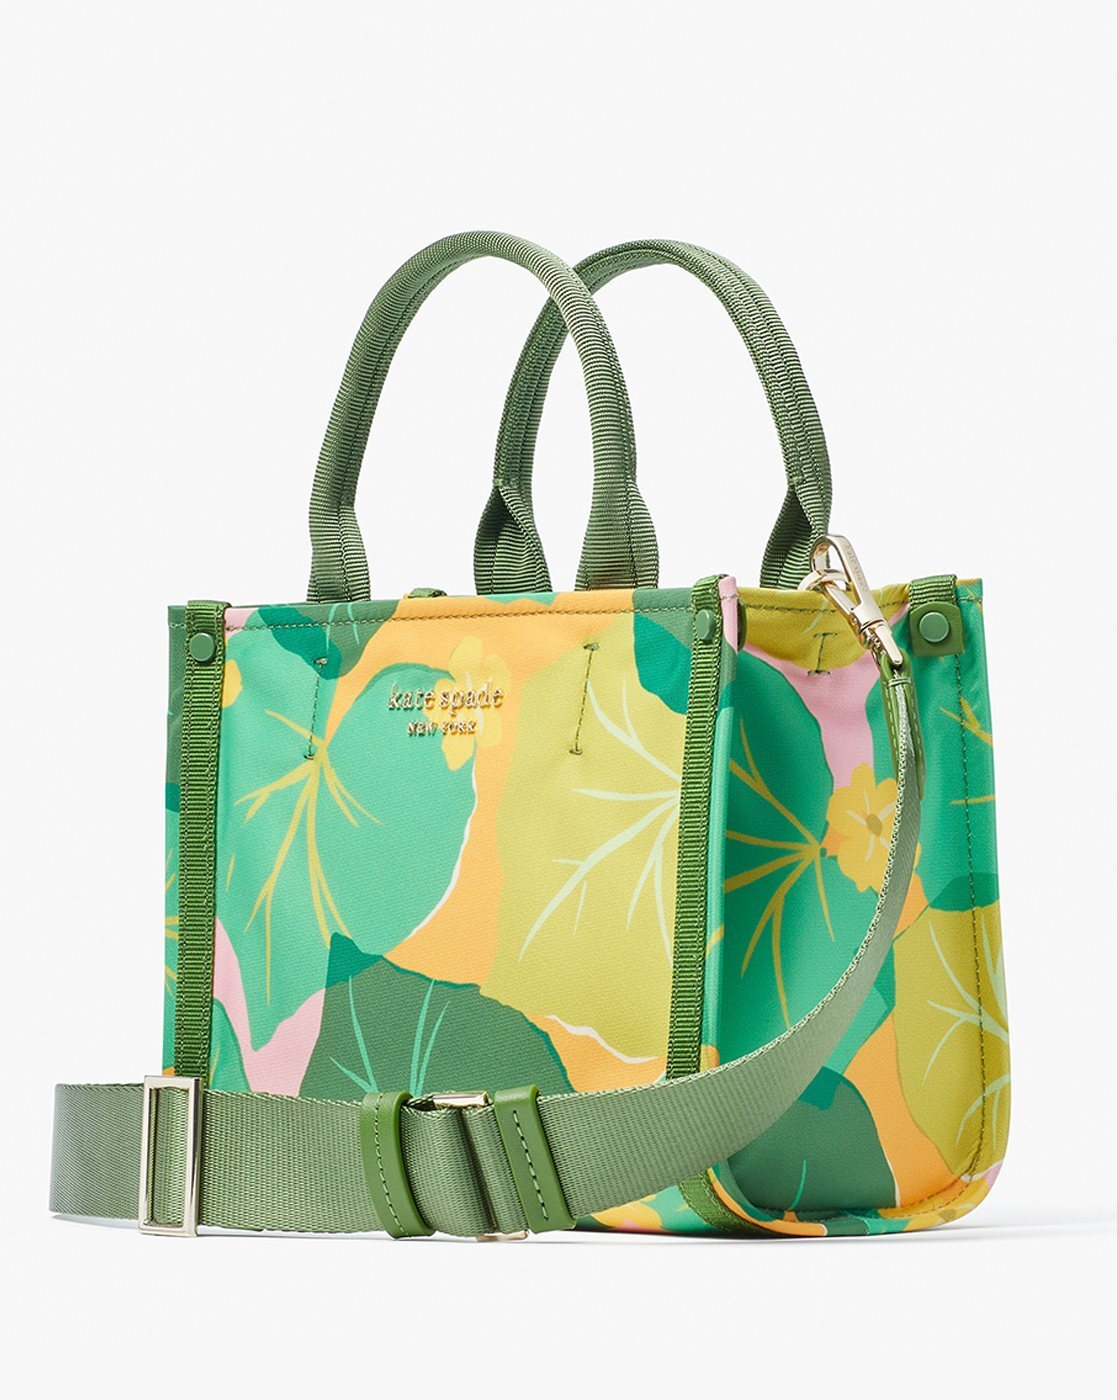 KATE SPADE Green Floral Tote